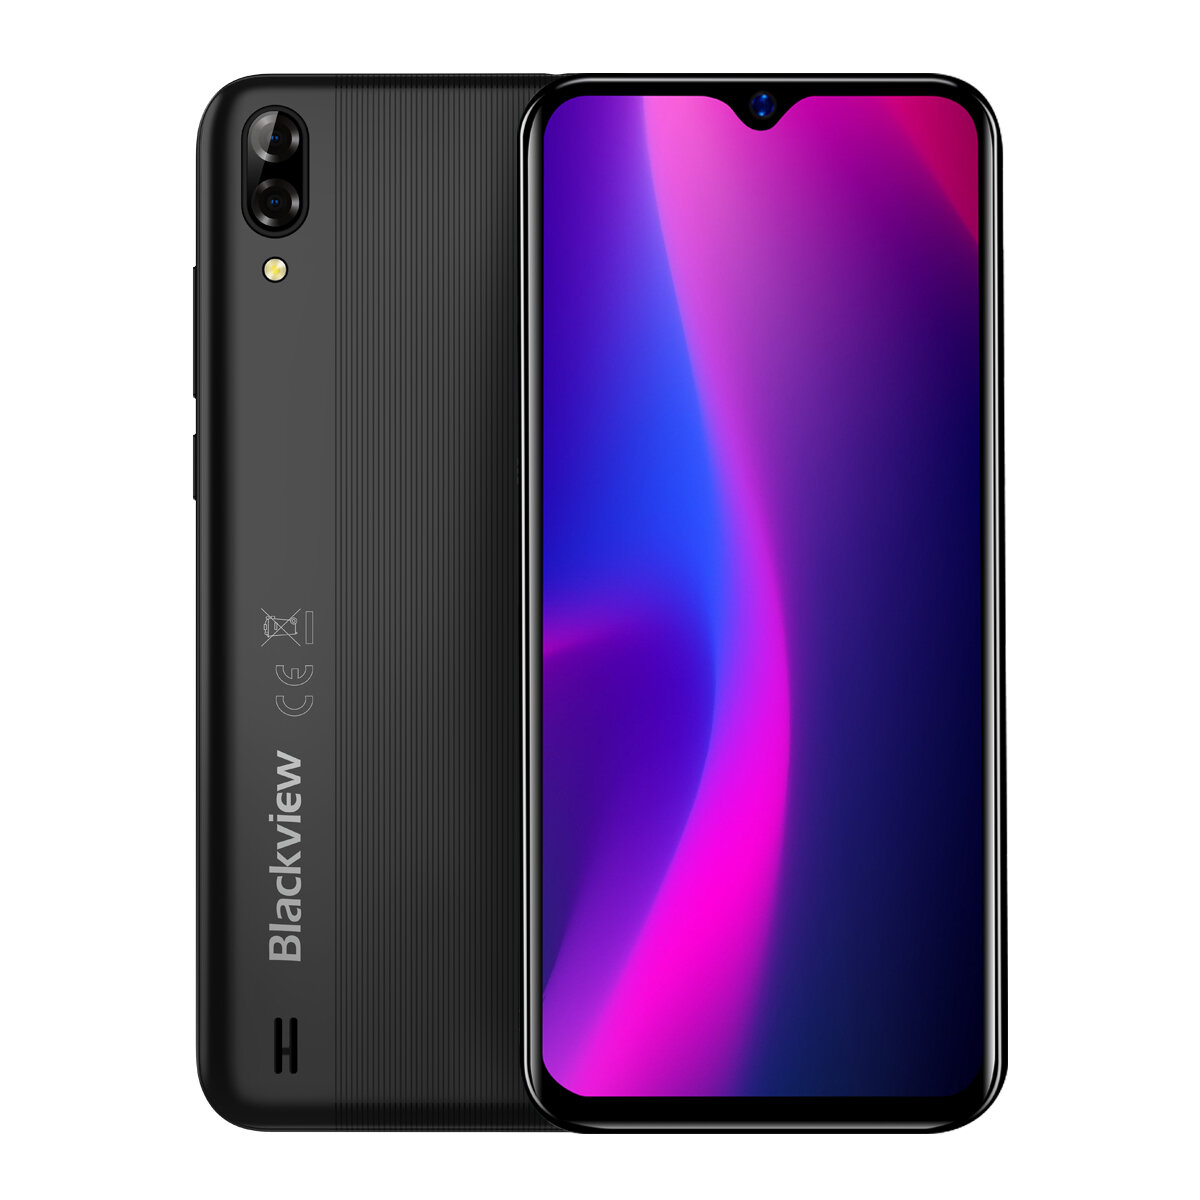 £54.62 30% Blackview A60 6.1 Inch 19:9 Waterdrop Screen 4080mAh Android 8.1 1GB RAM 16GB ROM MT6580A Quad Core 3G Smartphone Smartphones from Mobile Phones & Accessories on banggood.com